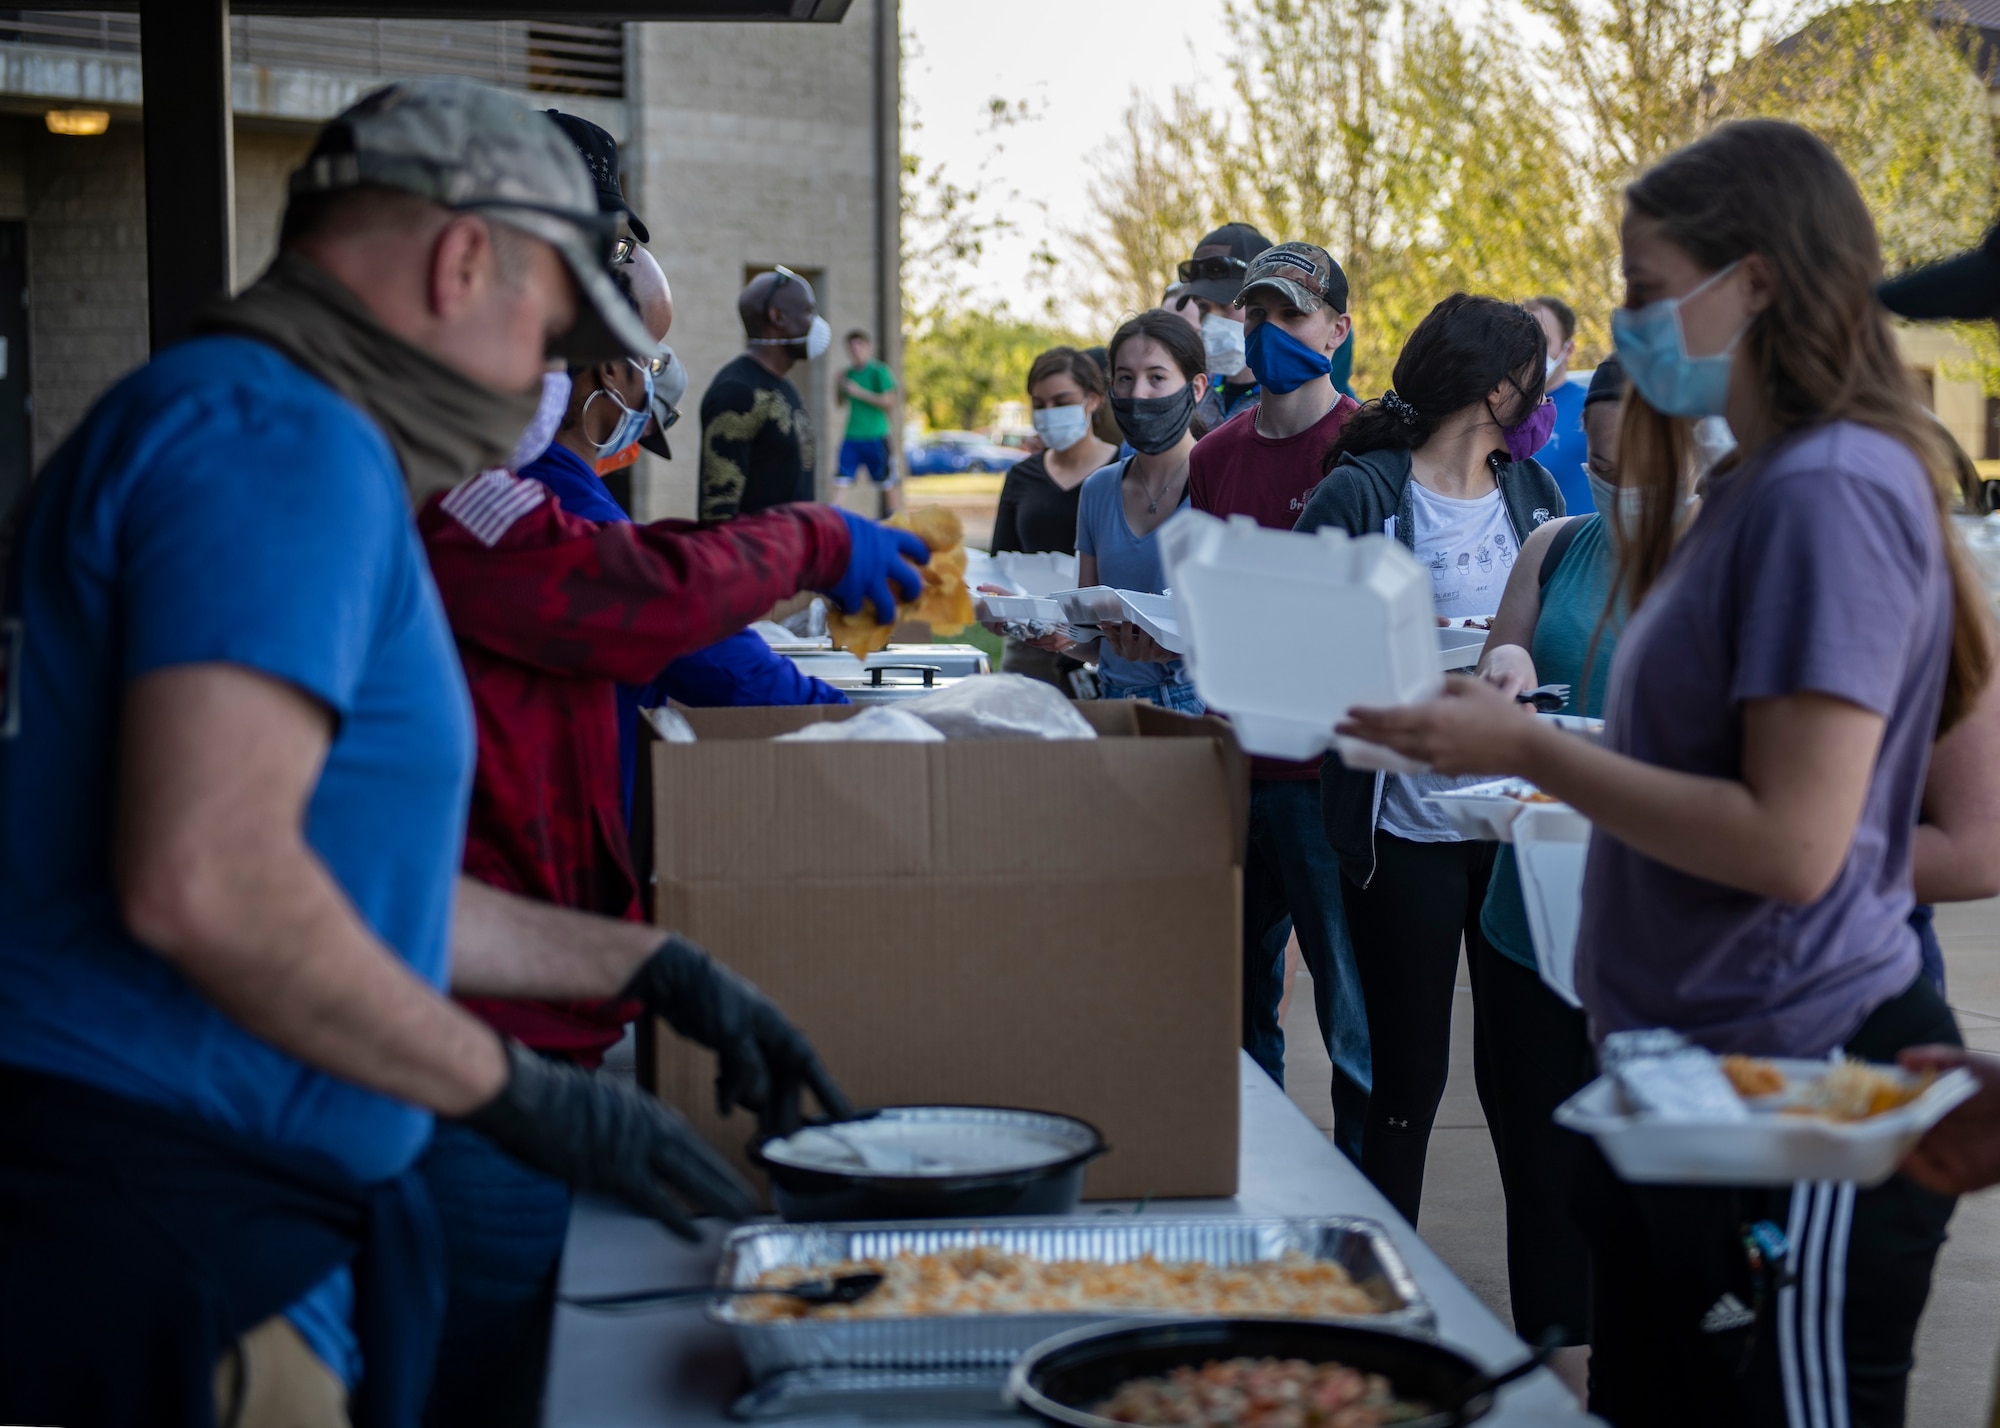 Airmen receive food from members of the Chaplain Corps and dorm leadership.